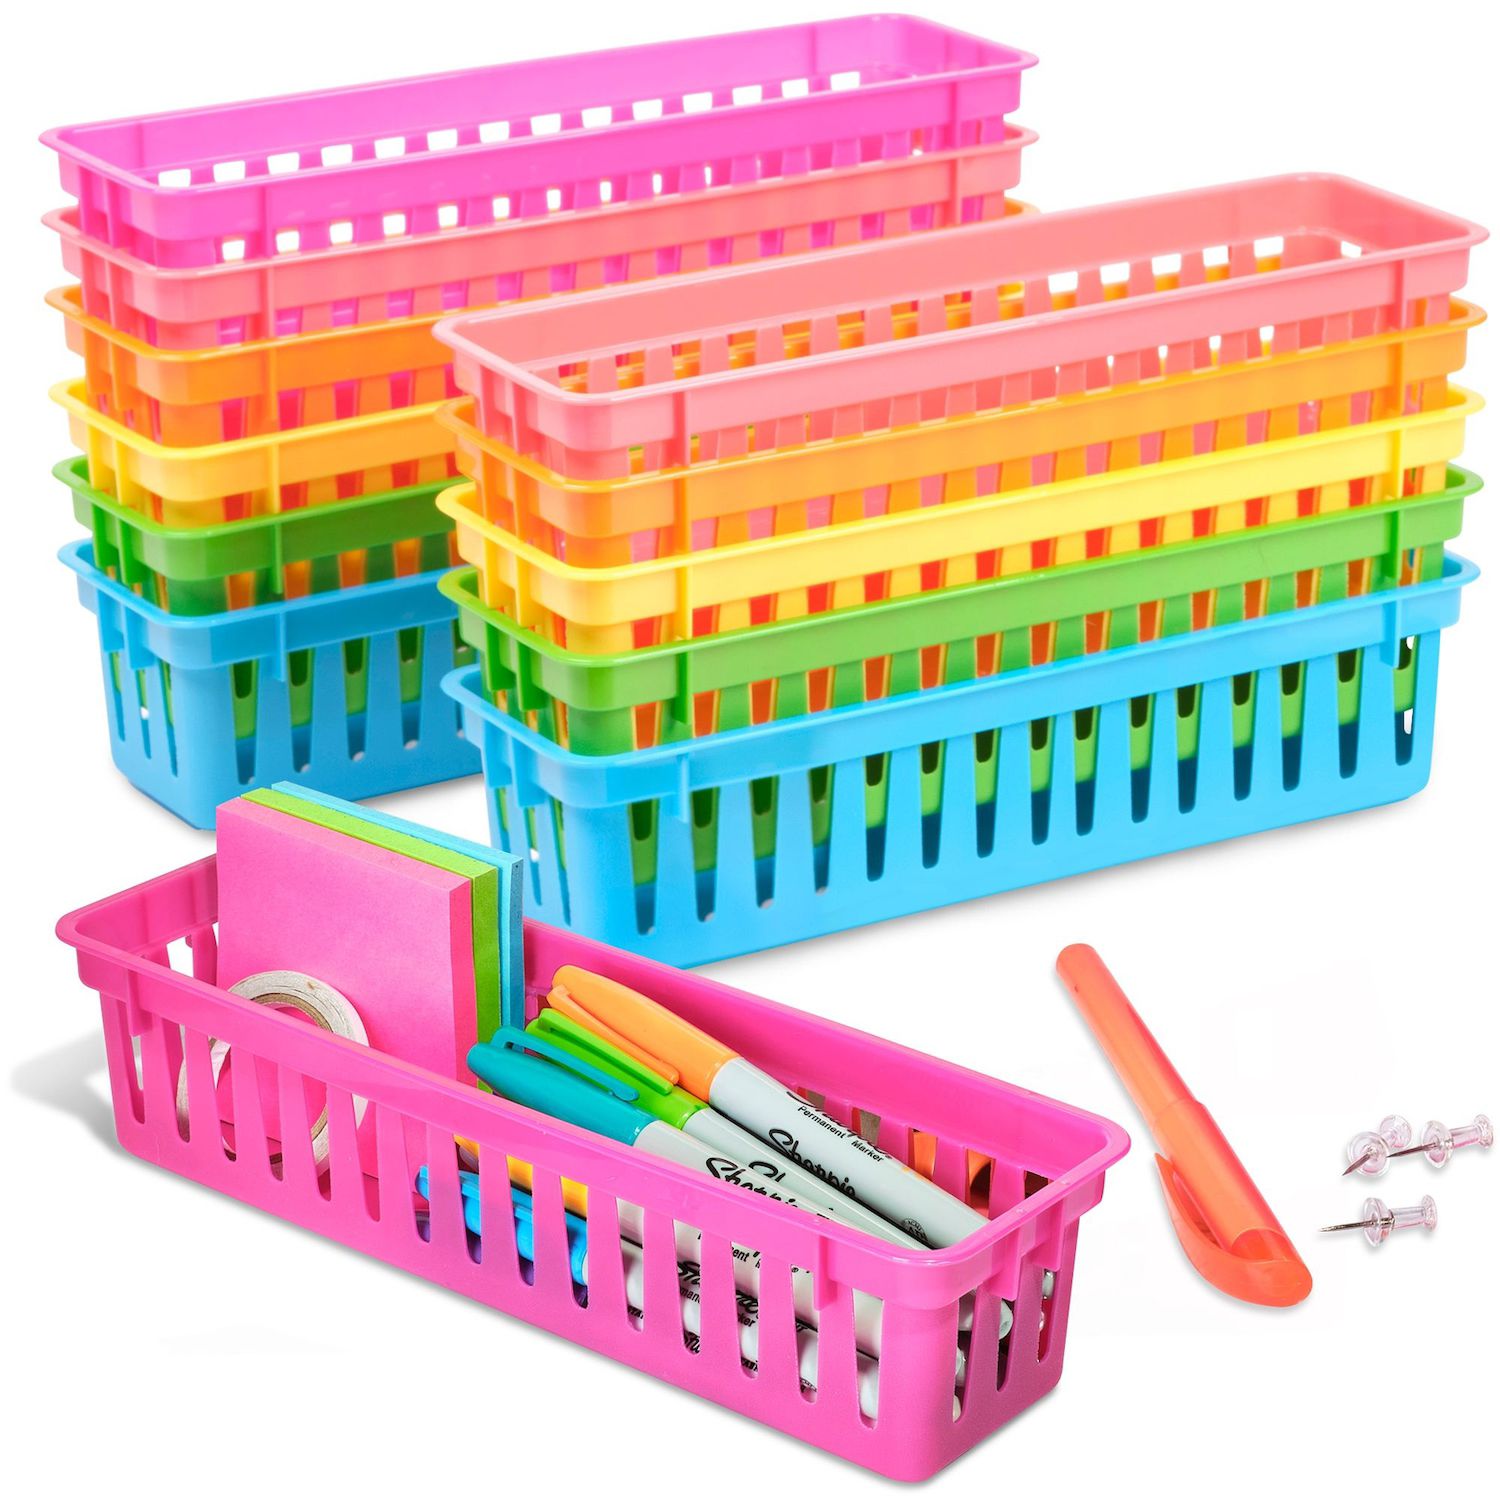 12-Pack Colorful Small Storage Baskets Plastic Bins for Organizing Shelves  and Desks, Arts and Crafts Containers for Home, School, Office (4 Colors,  5.3 x 5.3 x 2.4 in)